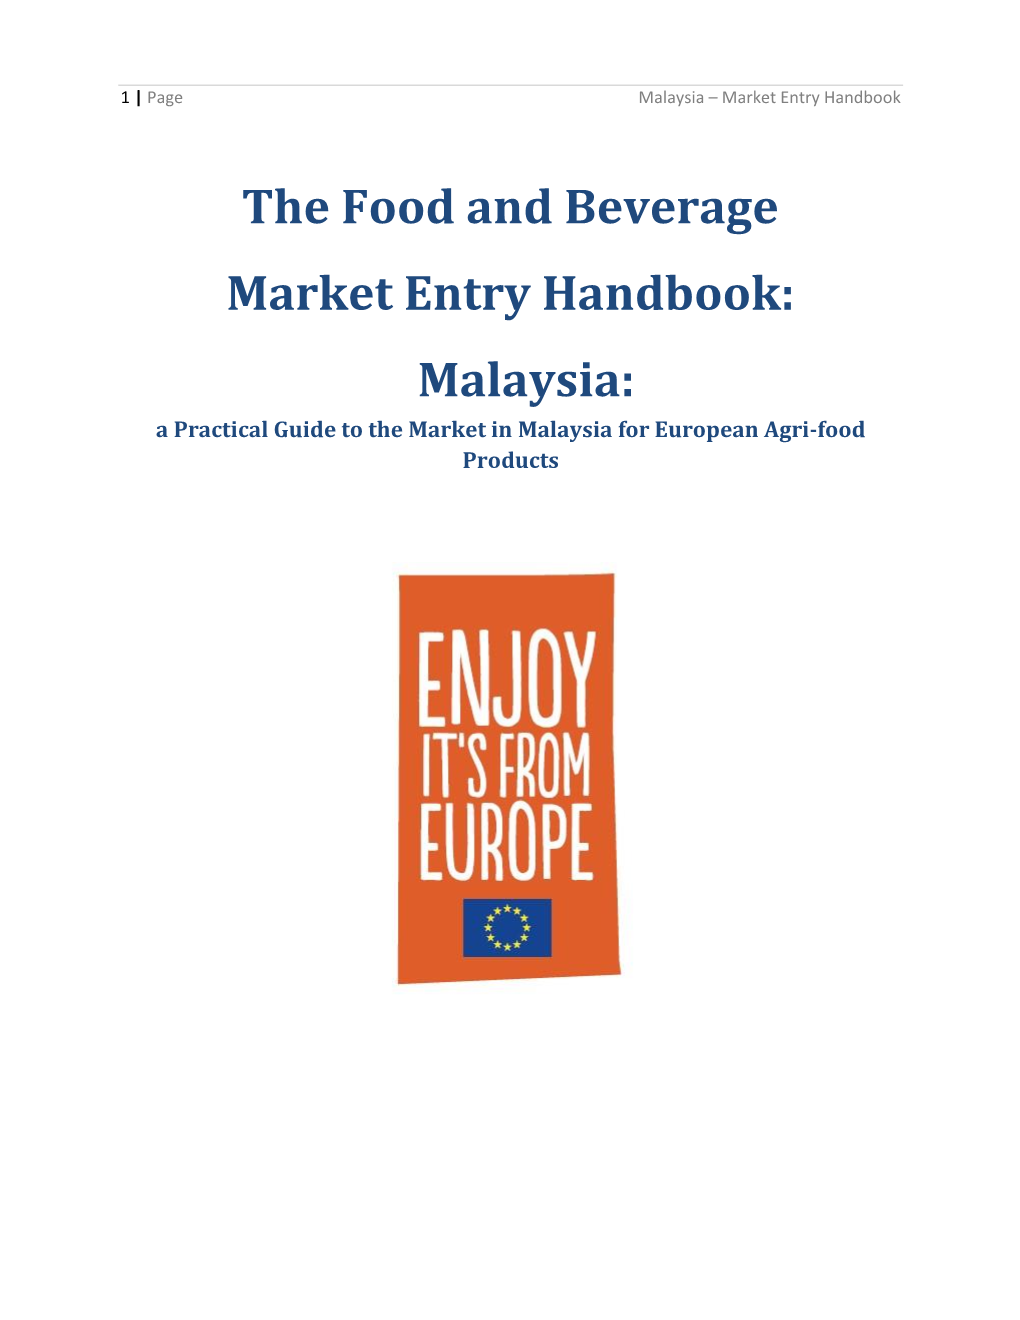 The Food and Beverage Market Entry Handbook: Malaysia